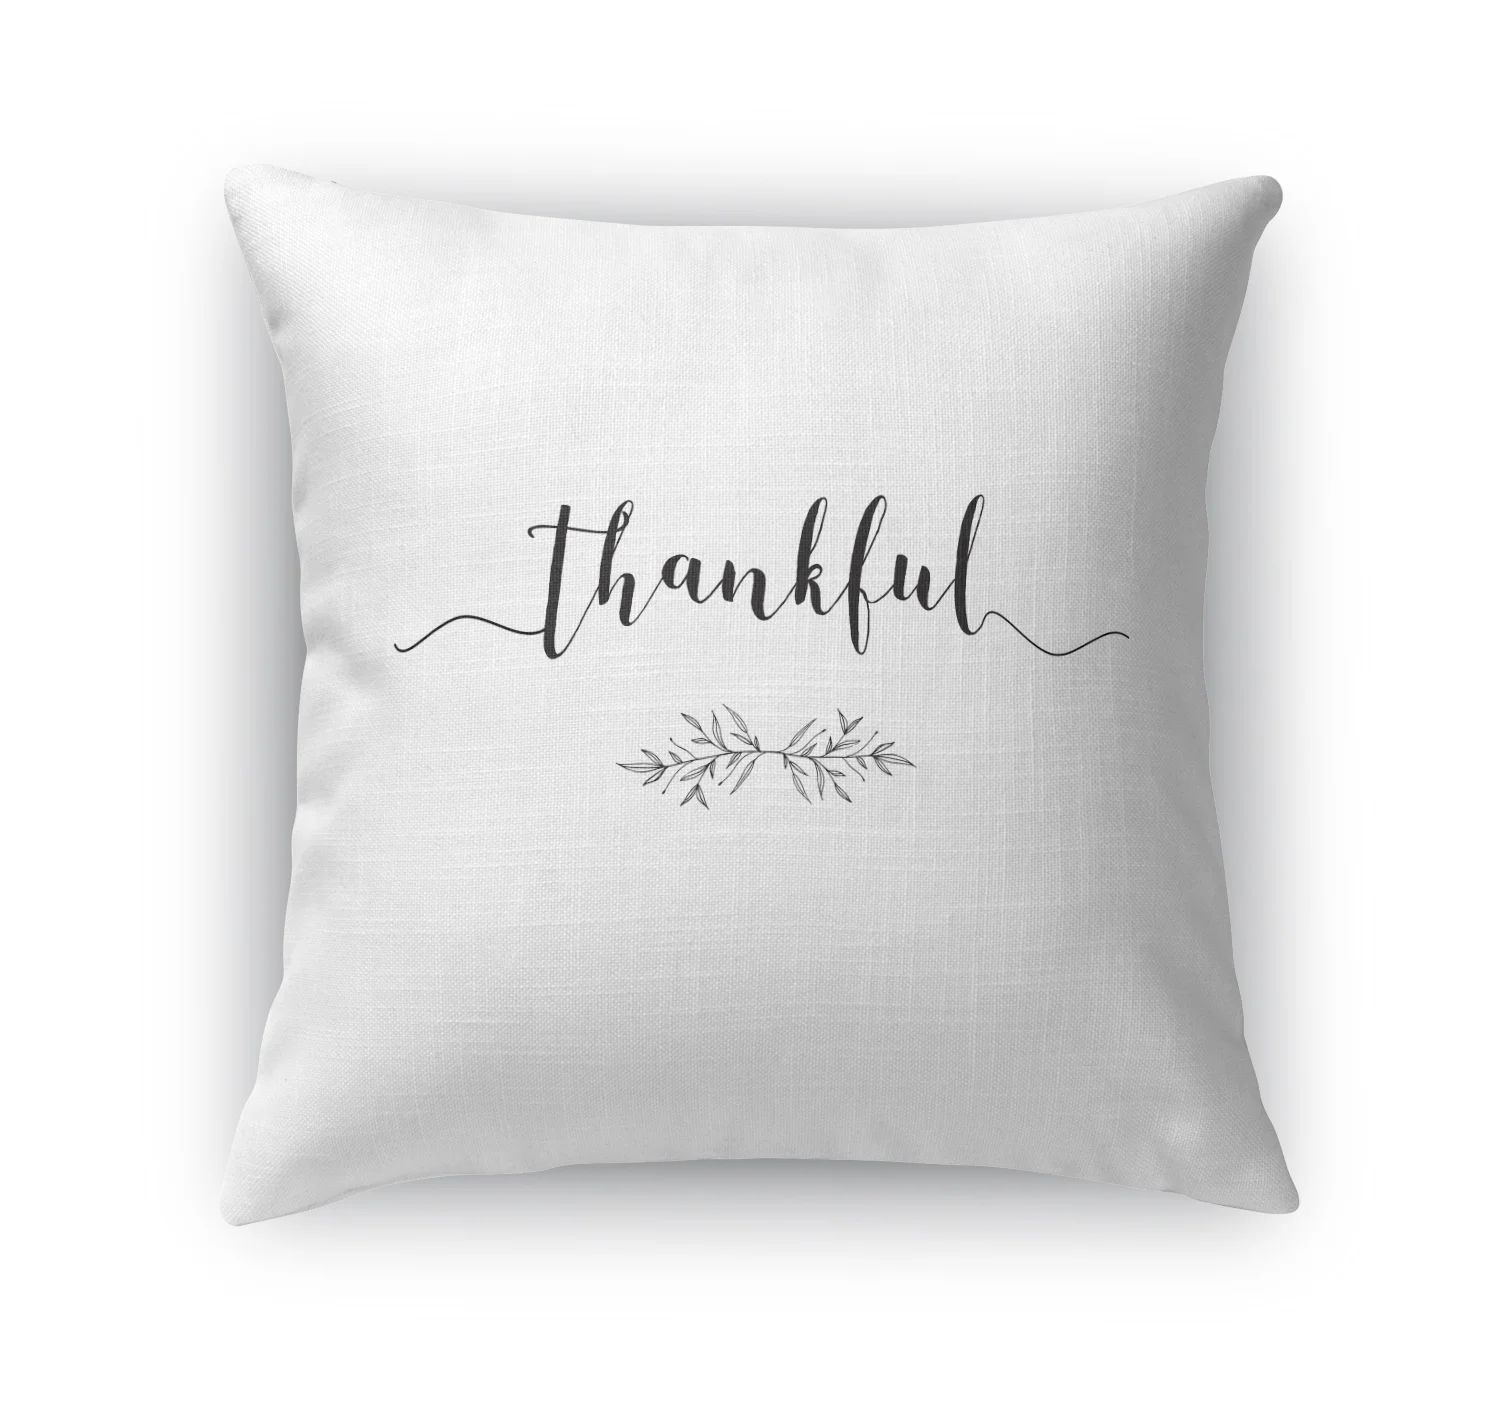 Thankful Square Pillow Cover & Insert | Wayfair North America